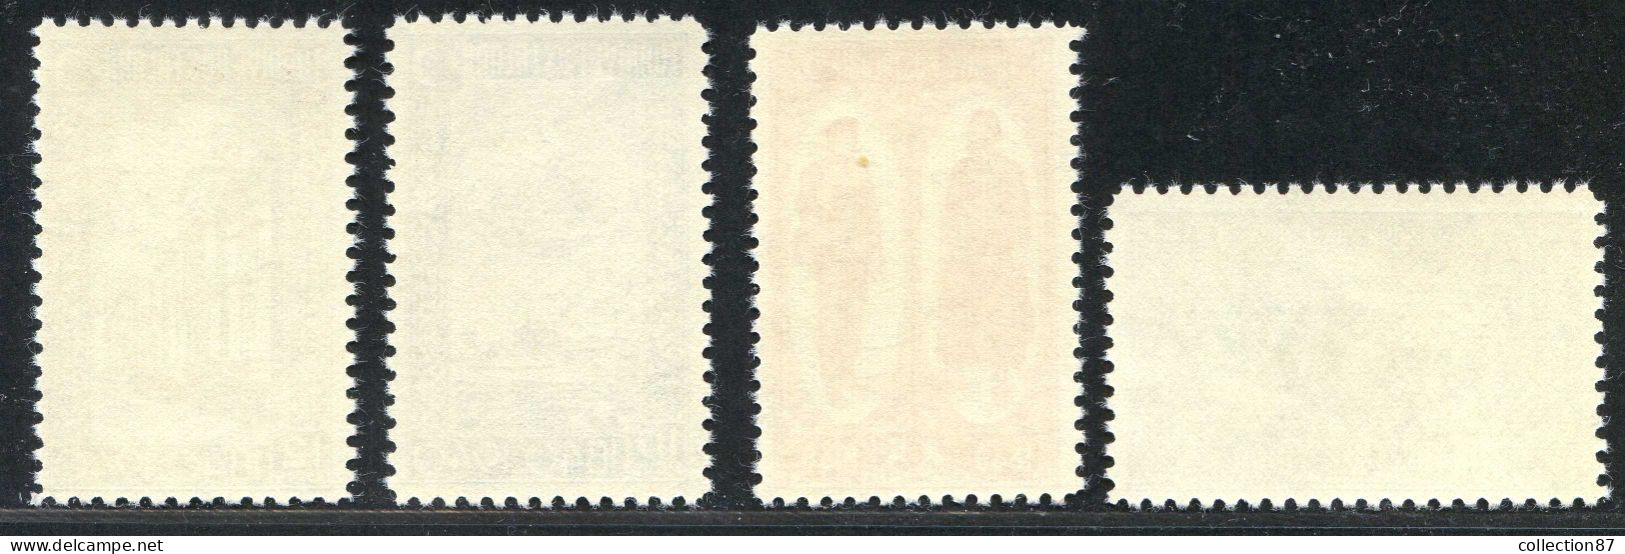 REF 091 > TURQUIE < Yv N° 947 à 950 * * < Neuf Luxe Dos Visible MNH * * - Turkey - Unused Stamps